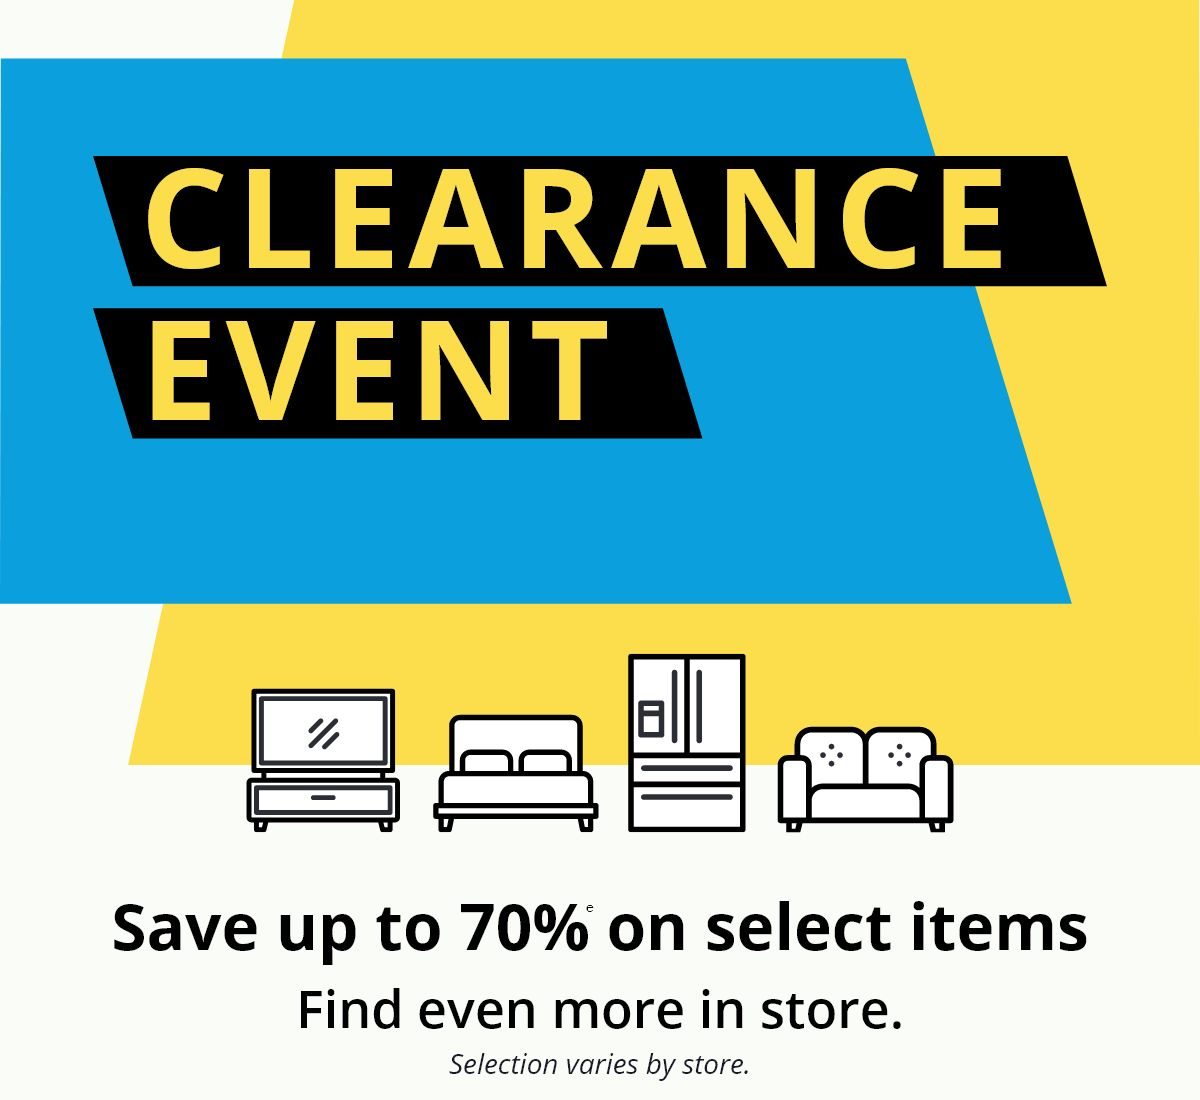 Save up to 70% on clearance